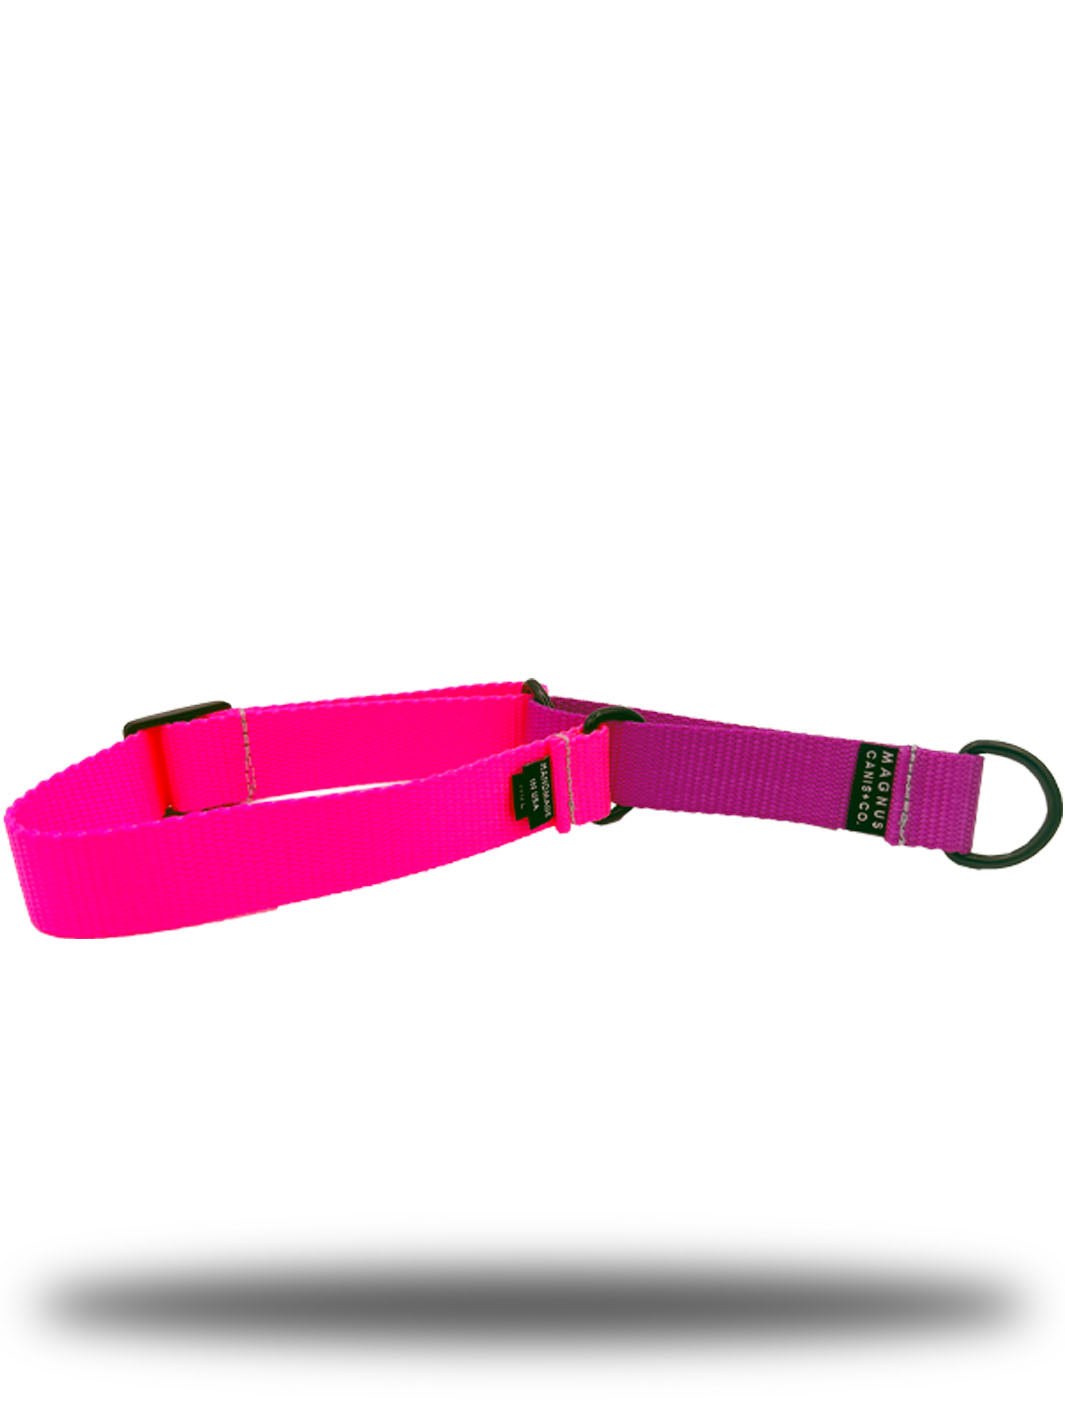 Neon pink and purple nylon webbing strap martingale dog collar by MAGNUS Canis.